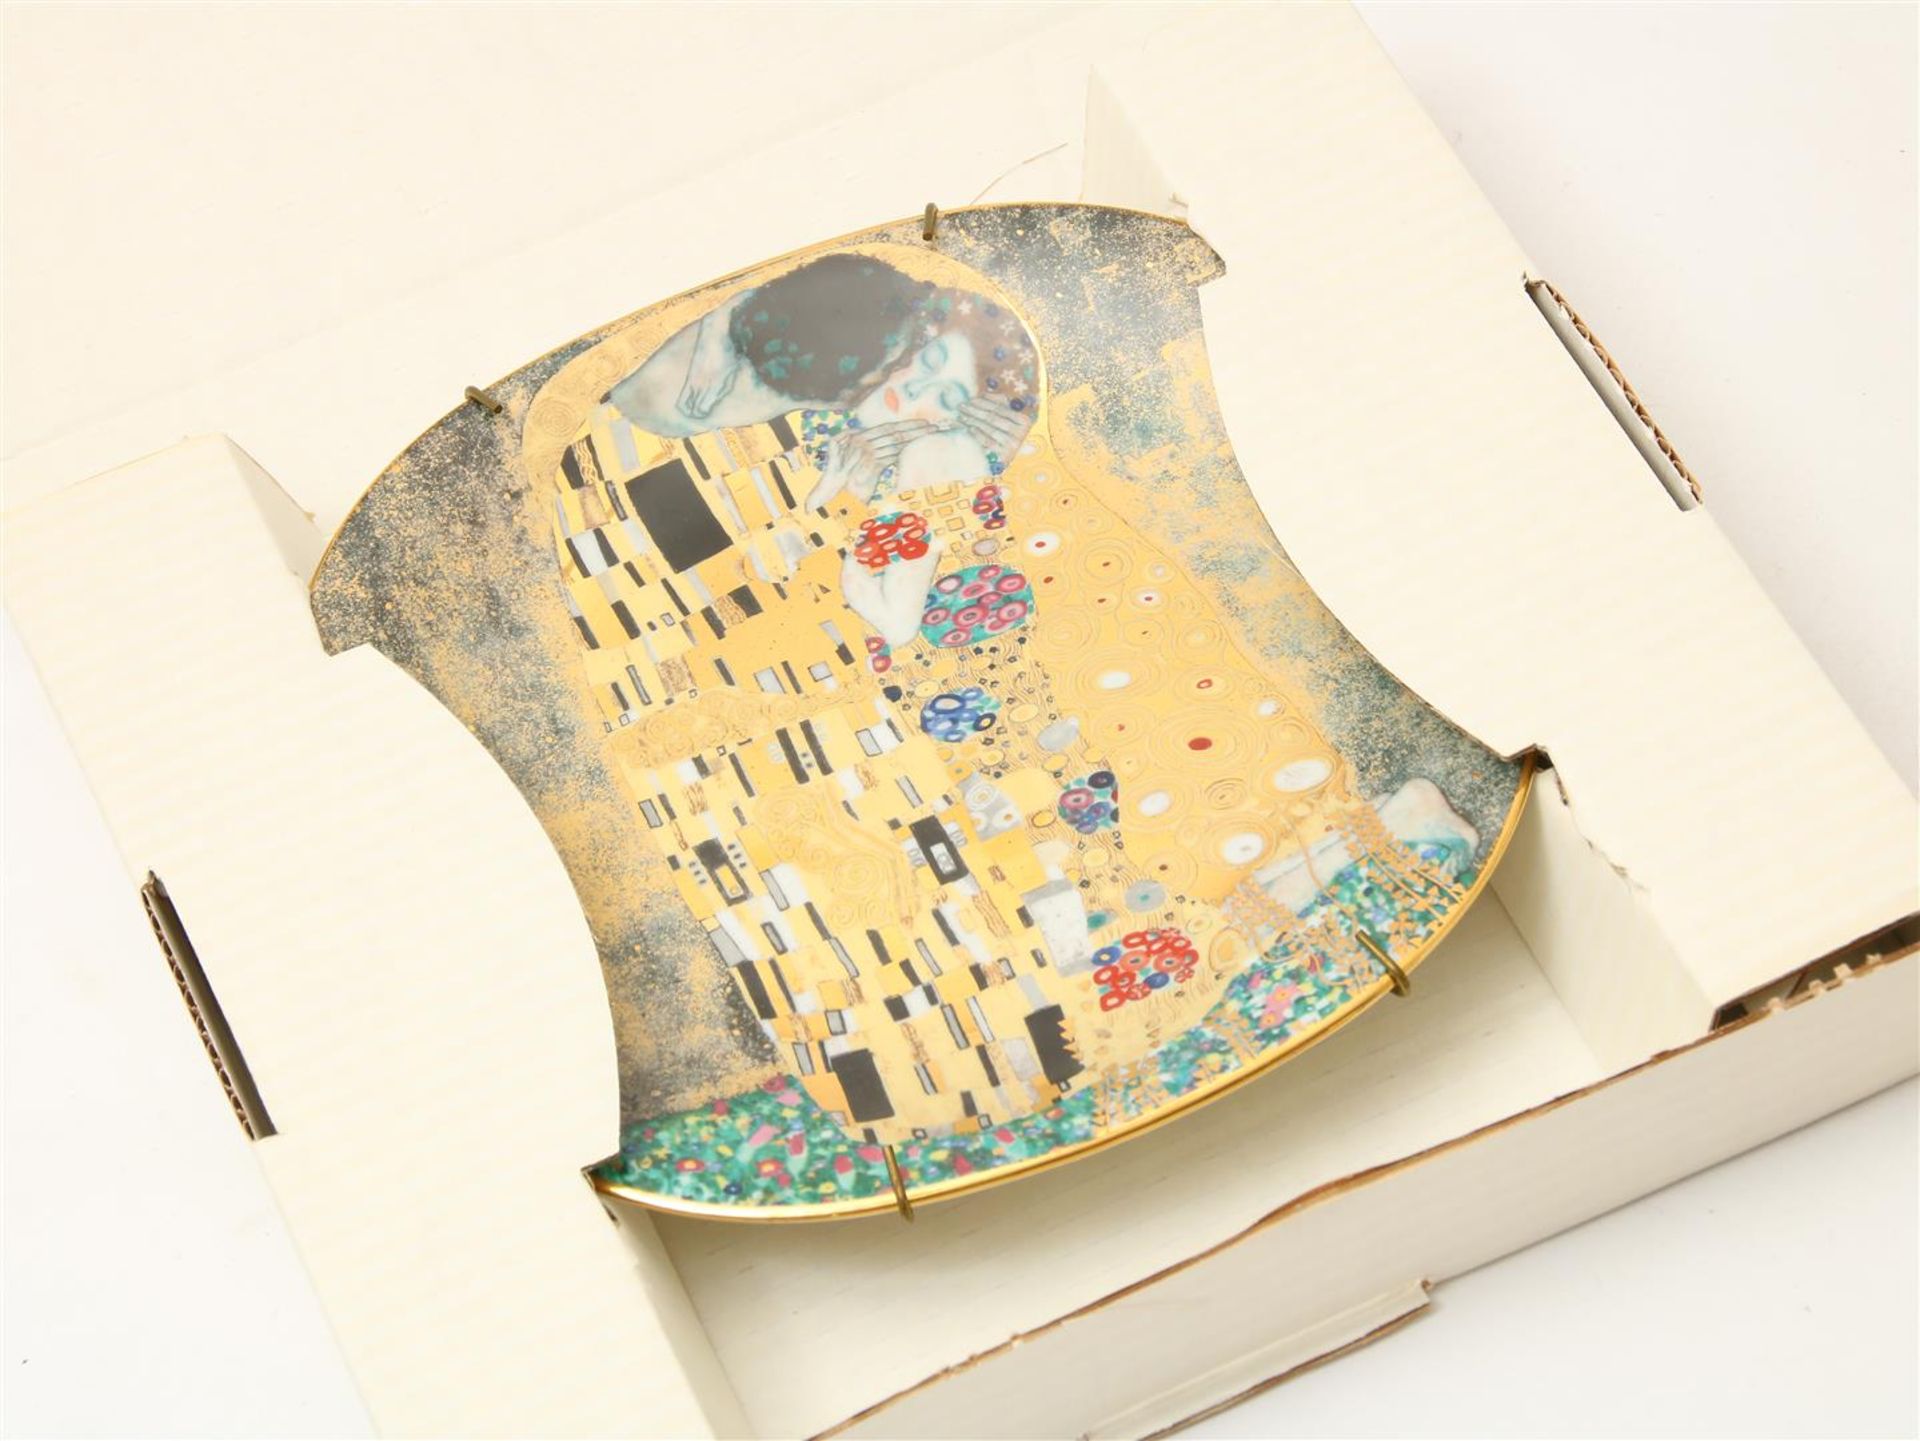 Series of 7 plates with images of the painter Gustav Klimt, Lilien porzellan, "Phantastic - Image 5 of 18